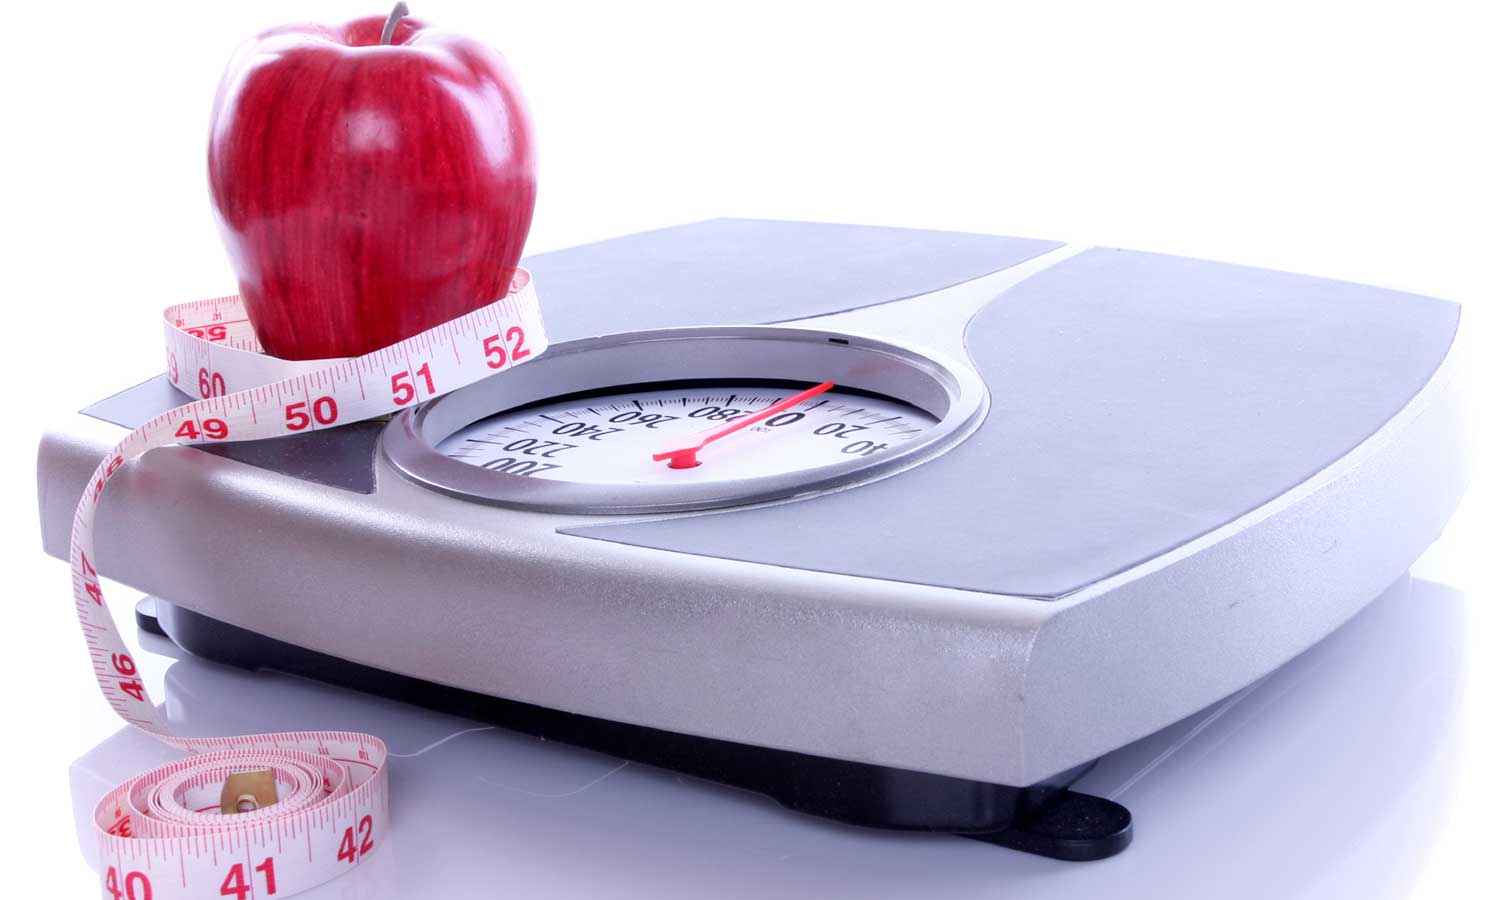 Top 5 Diet and Weight Loss Myths